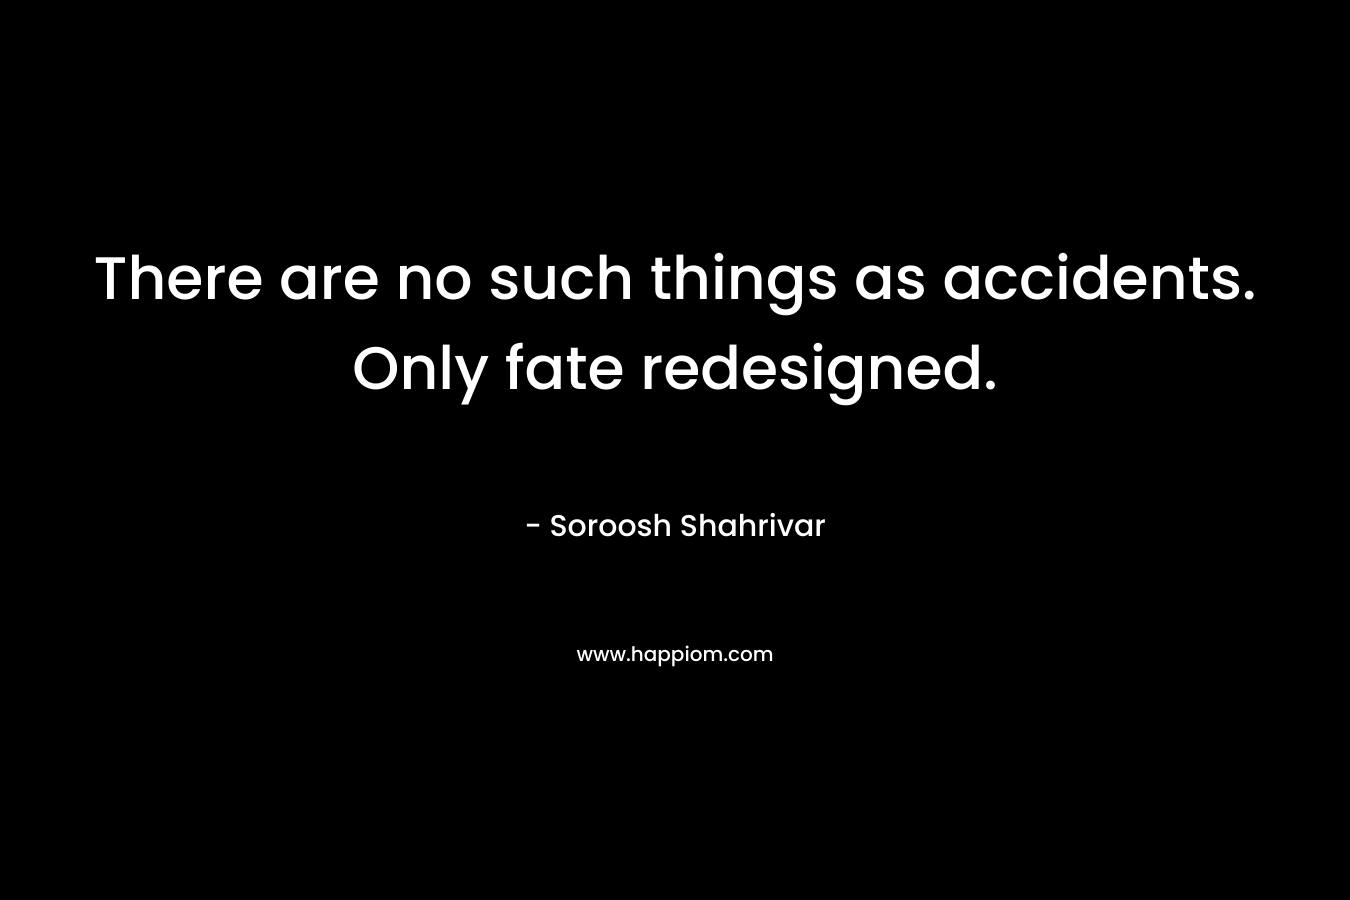 There are no such things as accidents. Only fate redesigned. – Soroosh Shahrivar